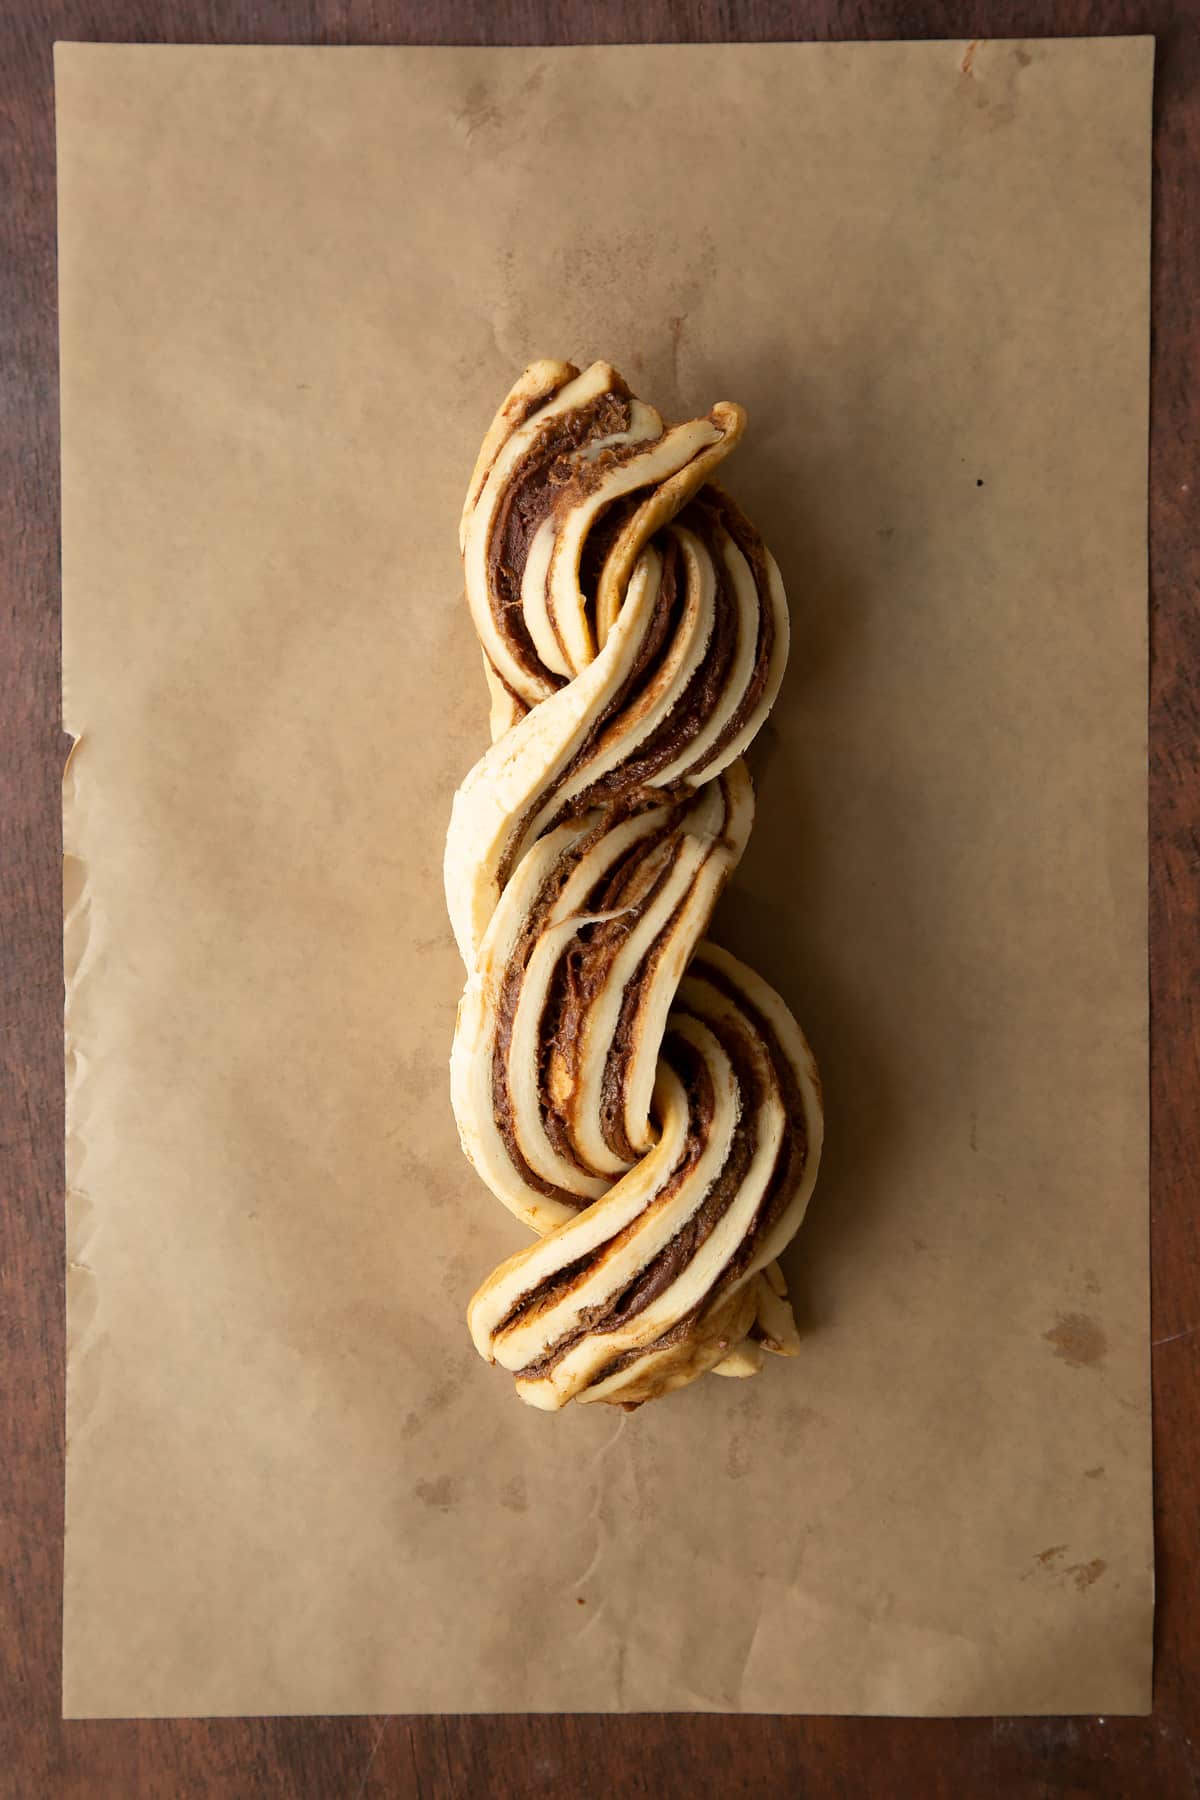 Cinnamon swirl dough rolled along the length to create a long sausage, then sliced down the length. The two striped pieces are then twisted together.